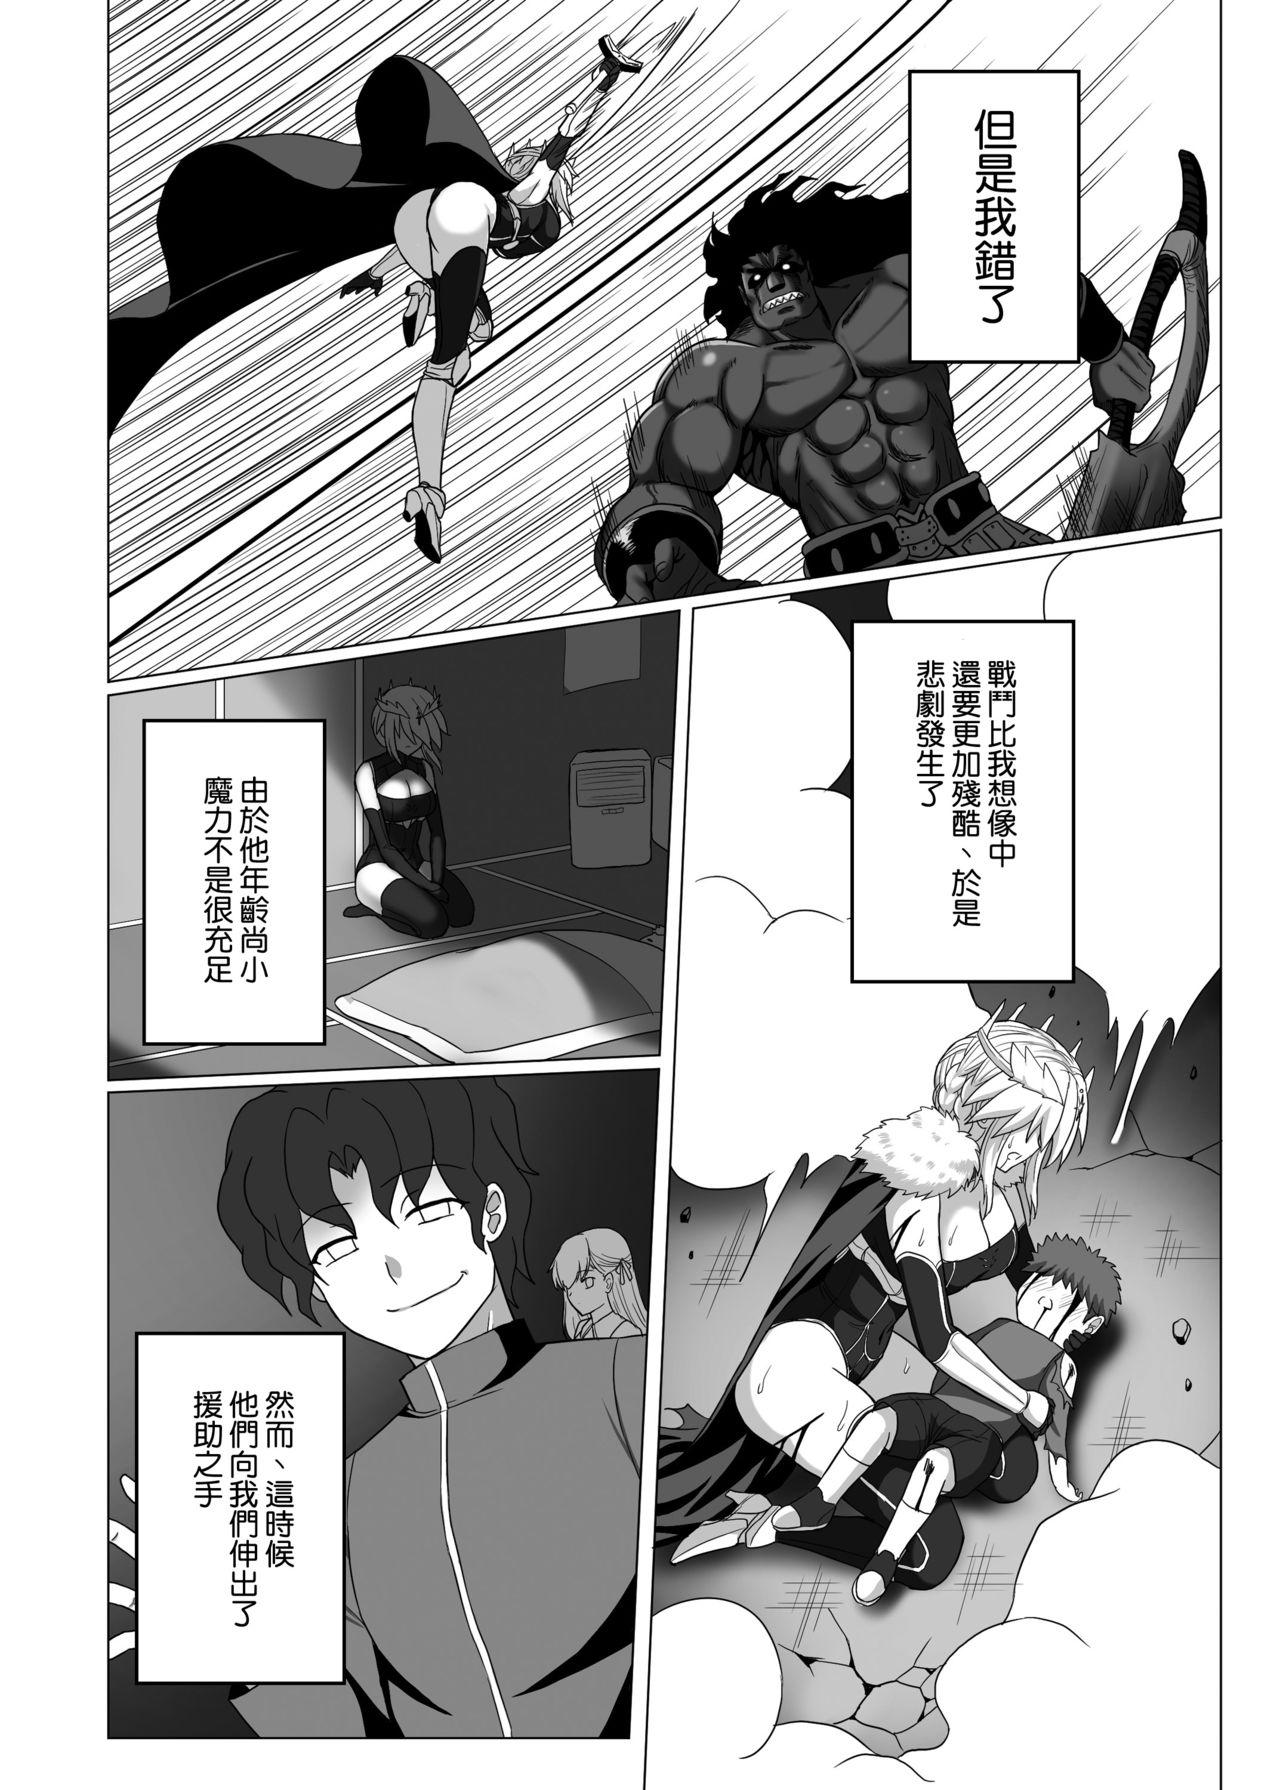 Skirt Fate/NTR - Fate grand order Time - Page 6